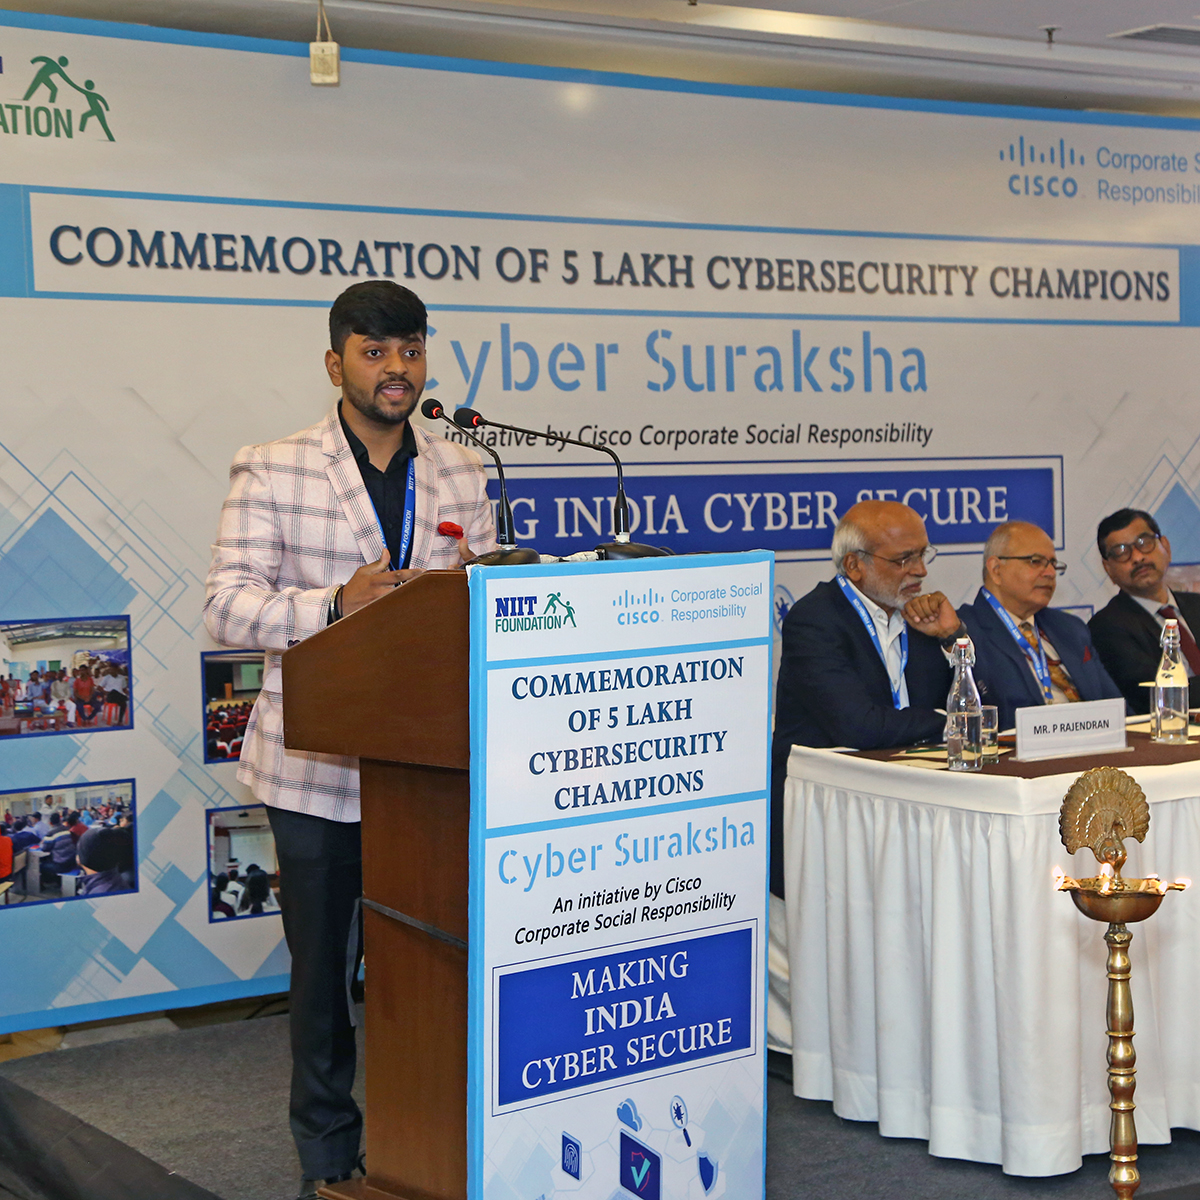 Learn how Cisco’s India Cash Grant Program, in partnership with @NIIT_Foundation, has trained more than 500,000 individuals in #cybersecurity through its Cyber Suraksha initiative: cs.co/6016jJkcK #SocialImpact